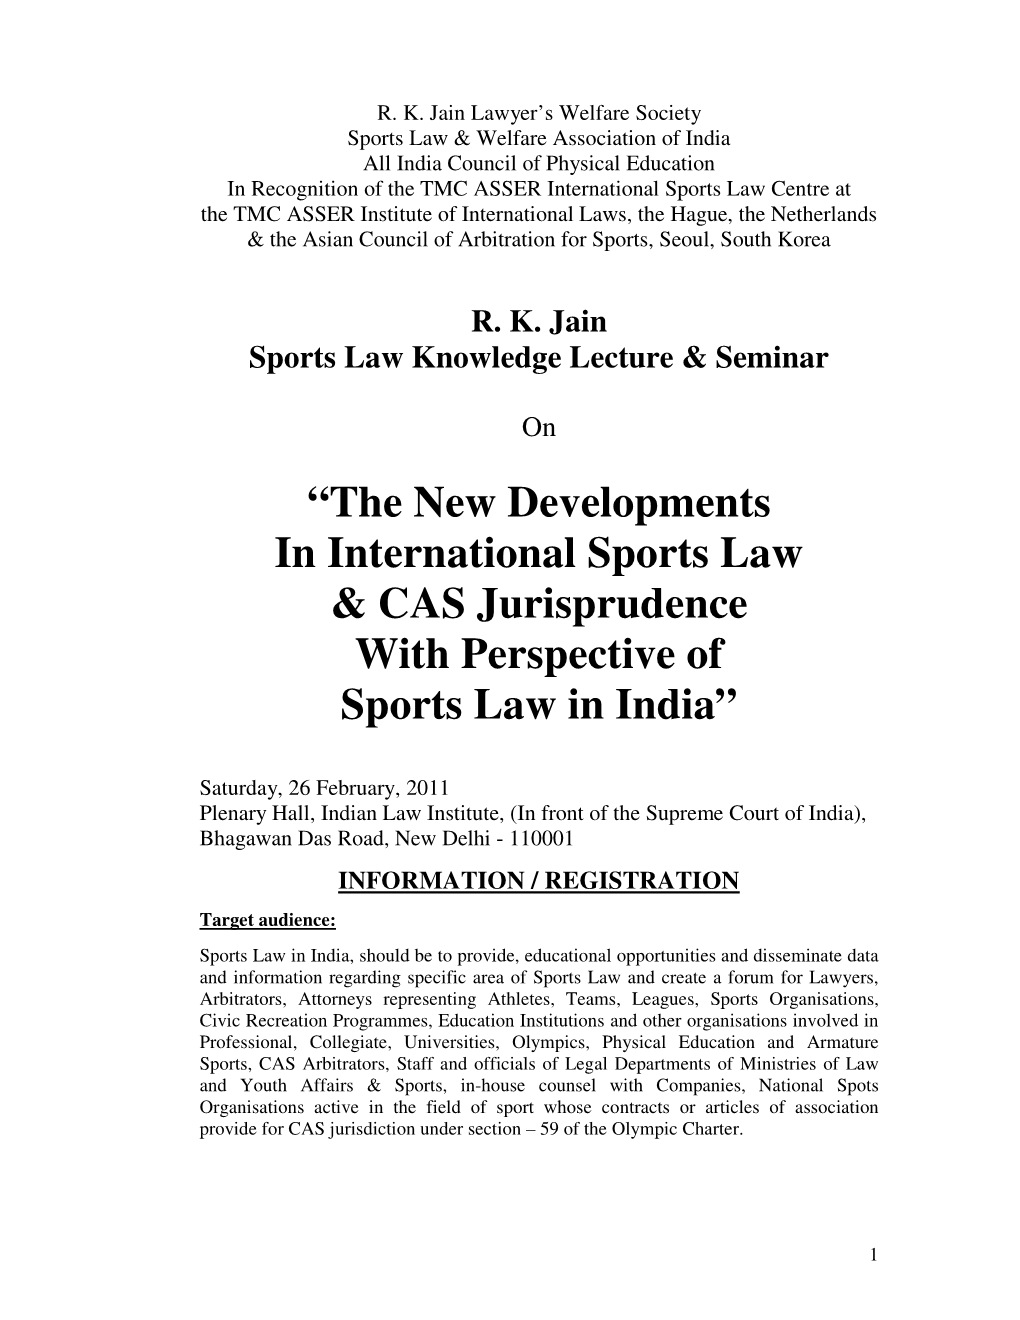 The New Developments in International Sports Law & CAS Jurisprudence with Perspective of Sports Law in India”